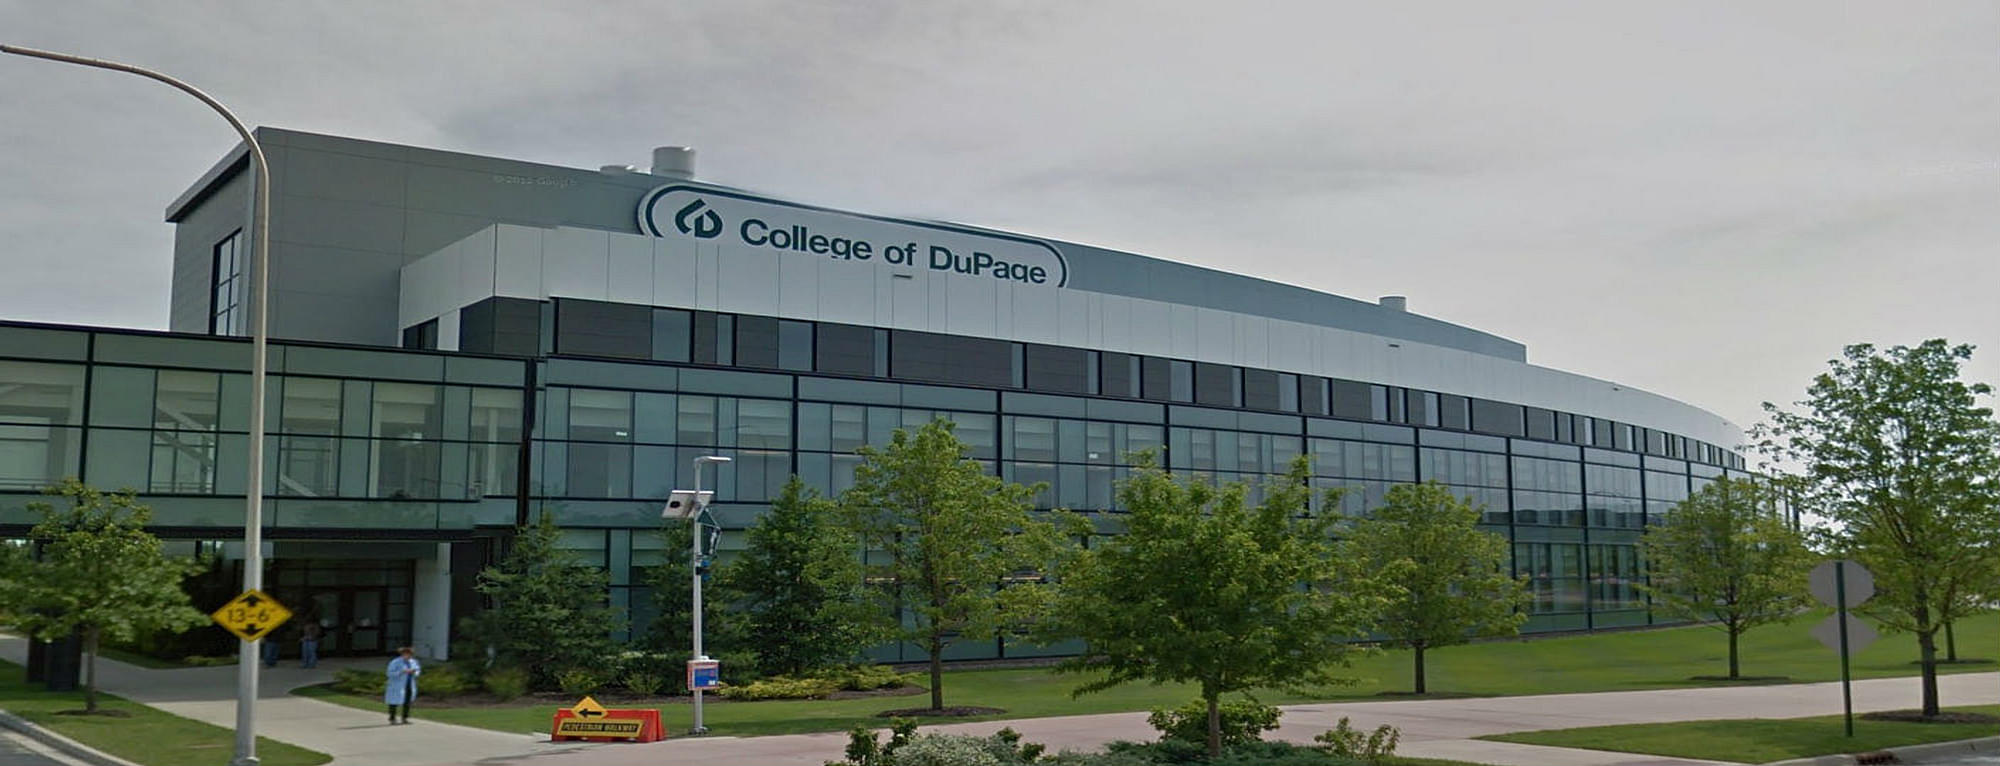 College Of DuPage [COD], Glen Ellyn Courses, Fees, Ranking, & Admission  Criteria